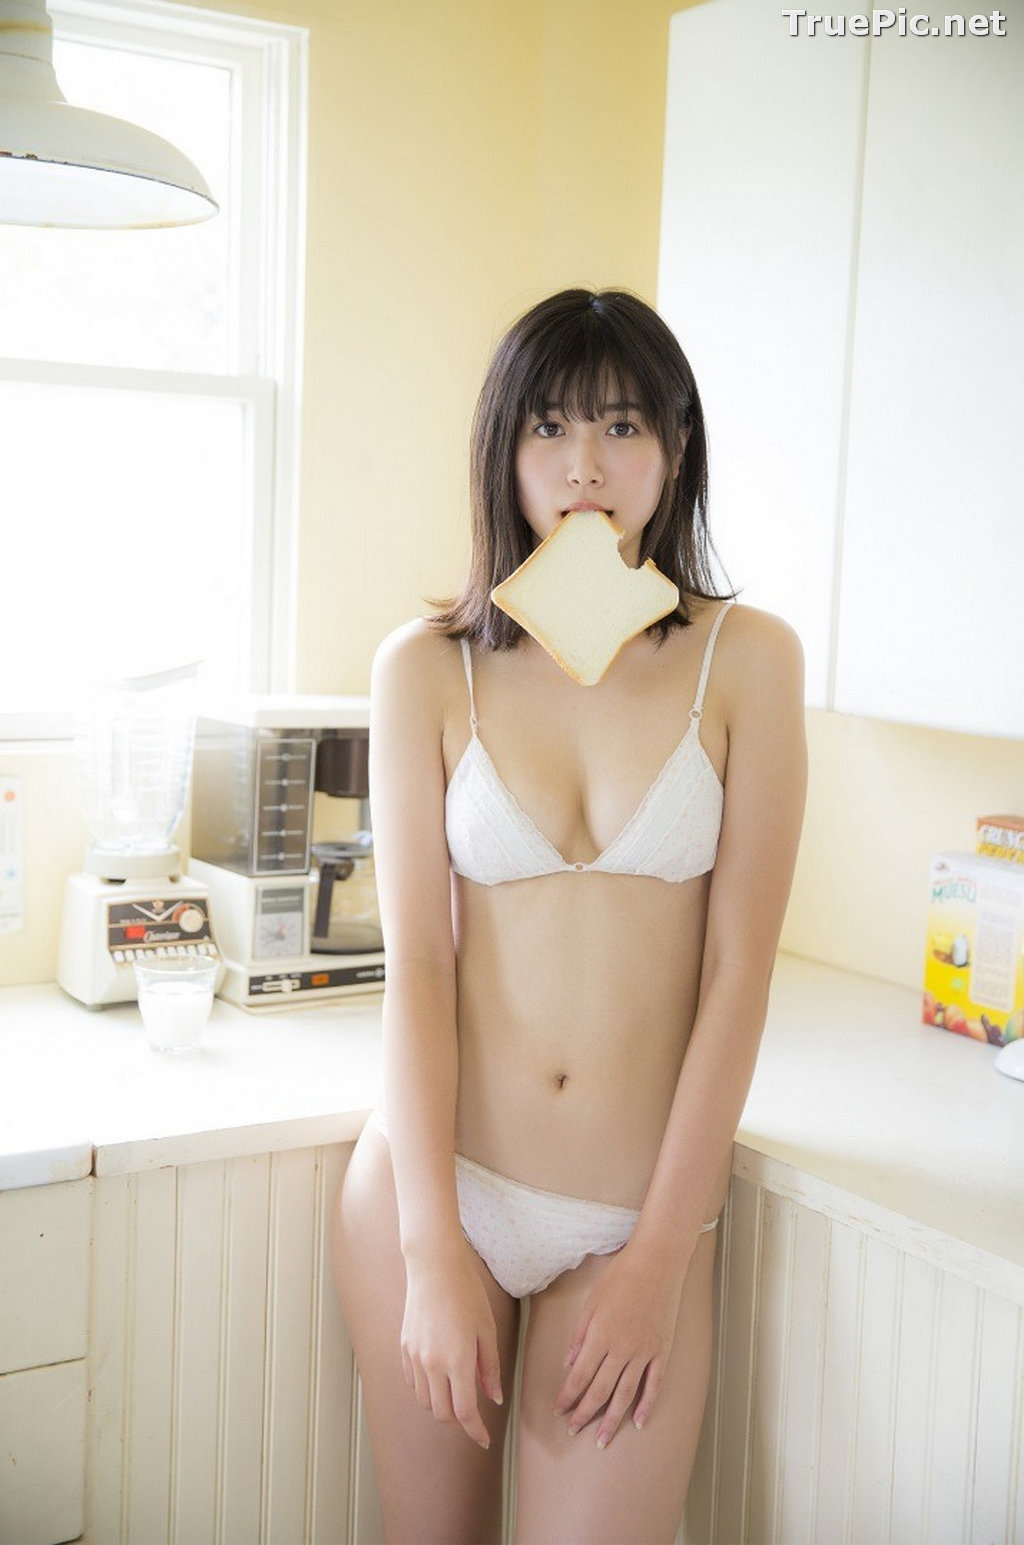 ImageJapanese Gravure Idol and Actress - Kitamuki Miyu (北向珠夕) - Sexy Picture Collection 2020 - TruePic.net - Picture-45